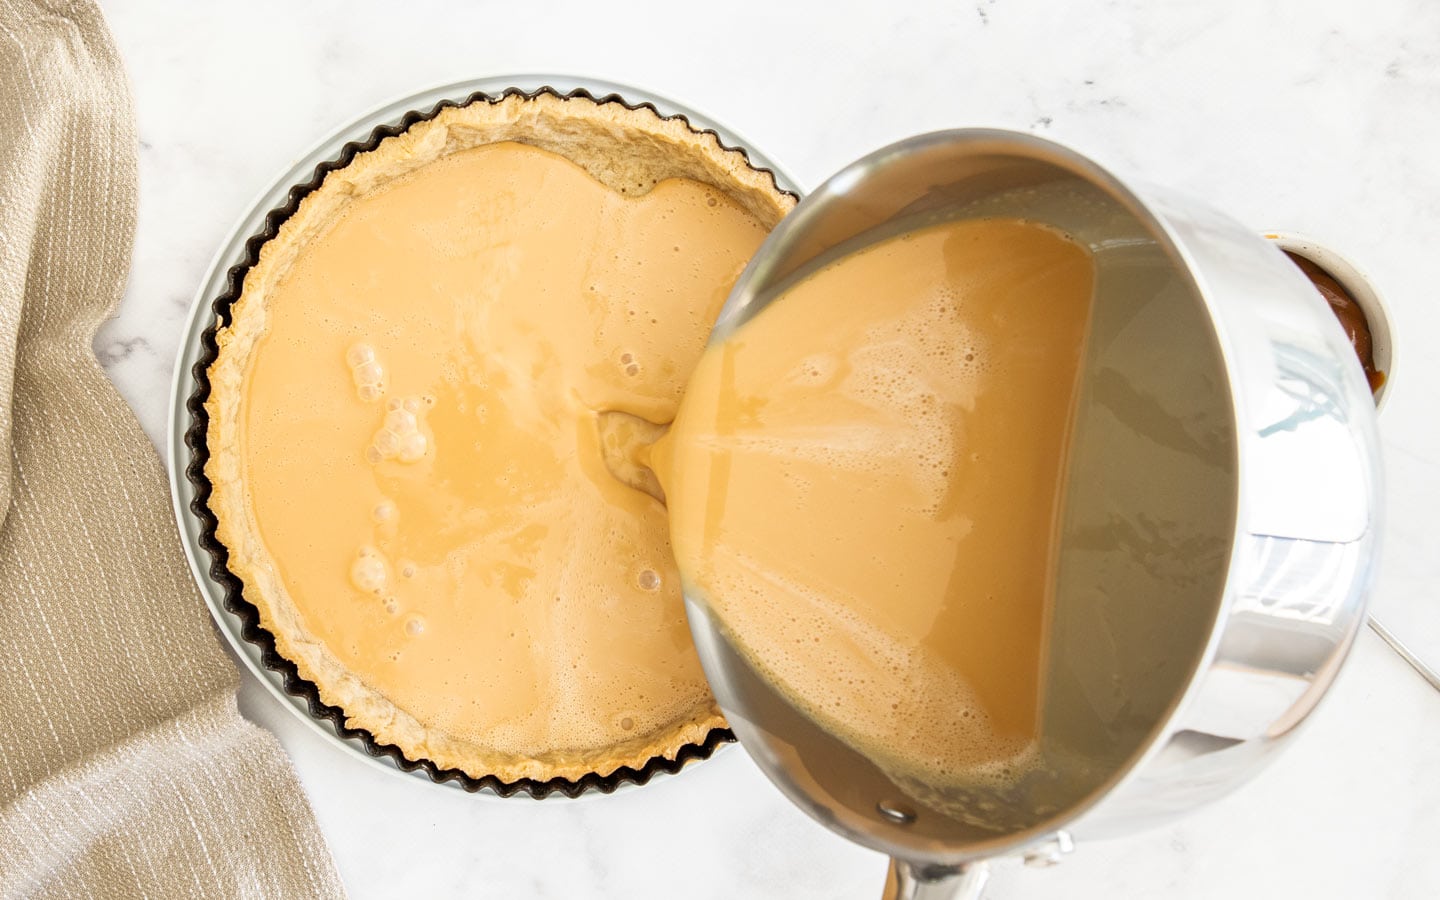 Pouring the caramel custard into the tart shell.